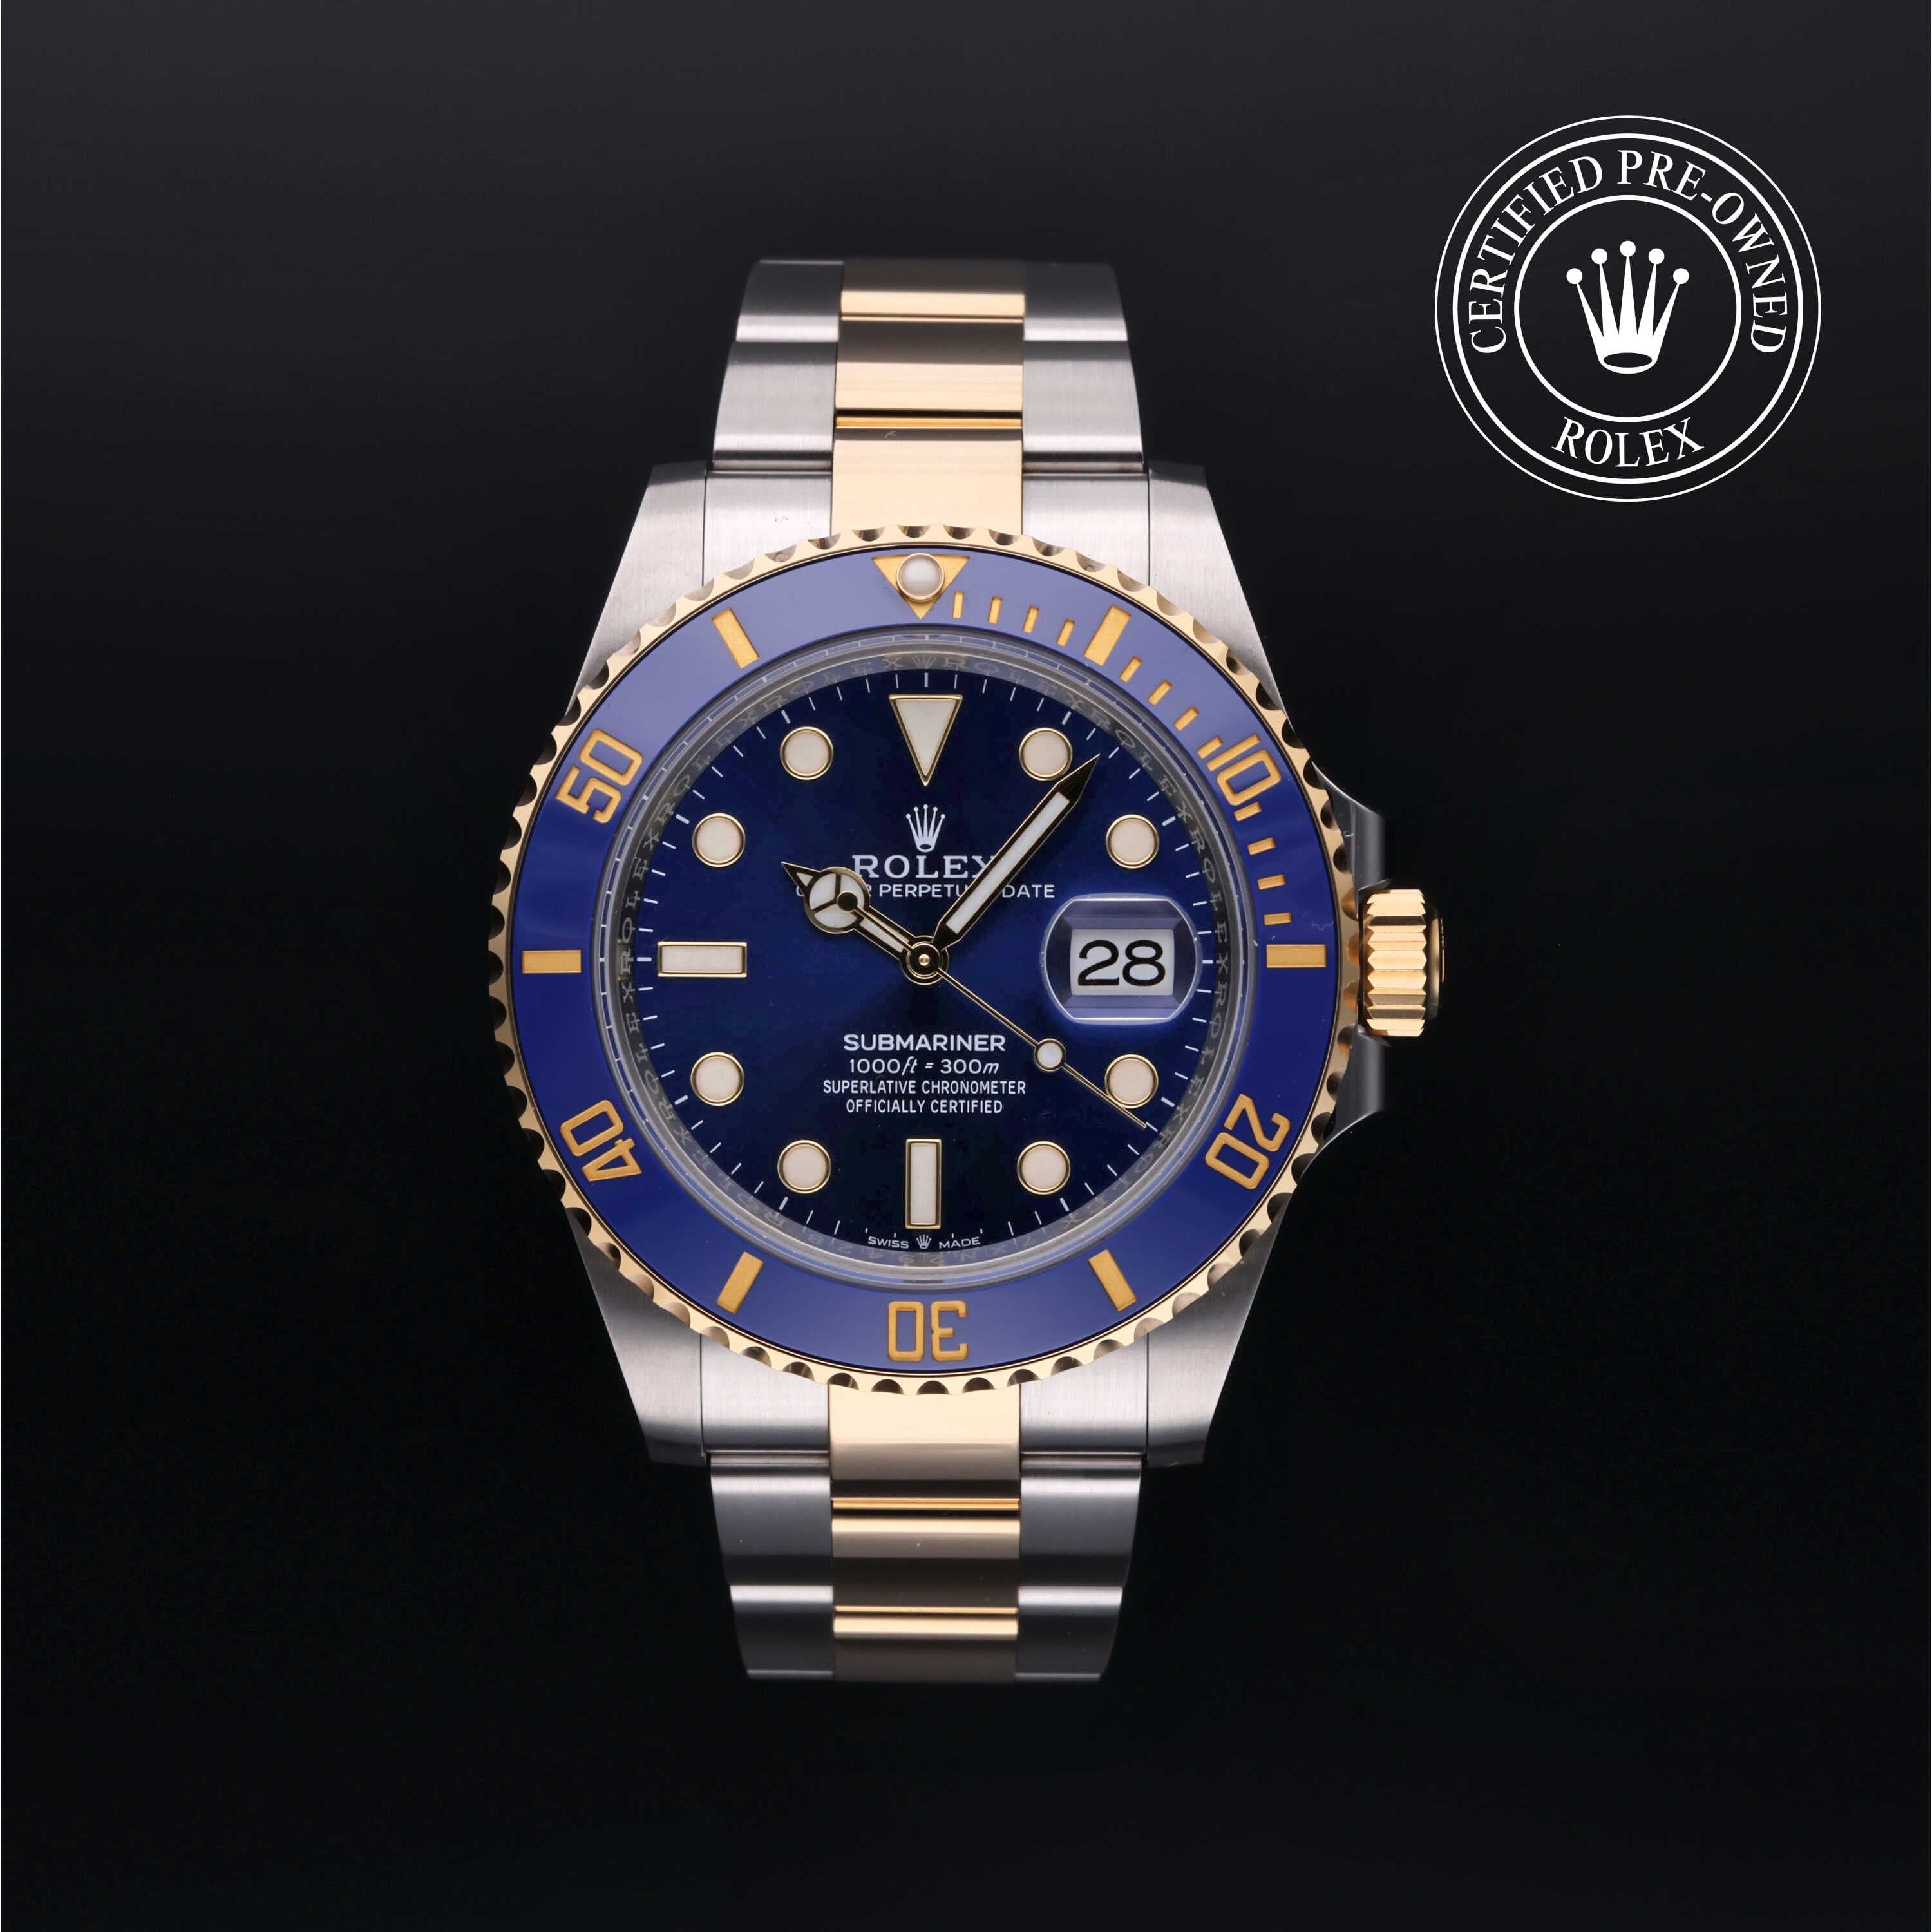 Rolex Certified Pre-Owned Submariner in Oyster, 41 mm, Stainless Steel and yellow gold 126613LB watch available at Long's Jewelers.